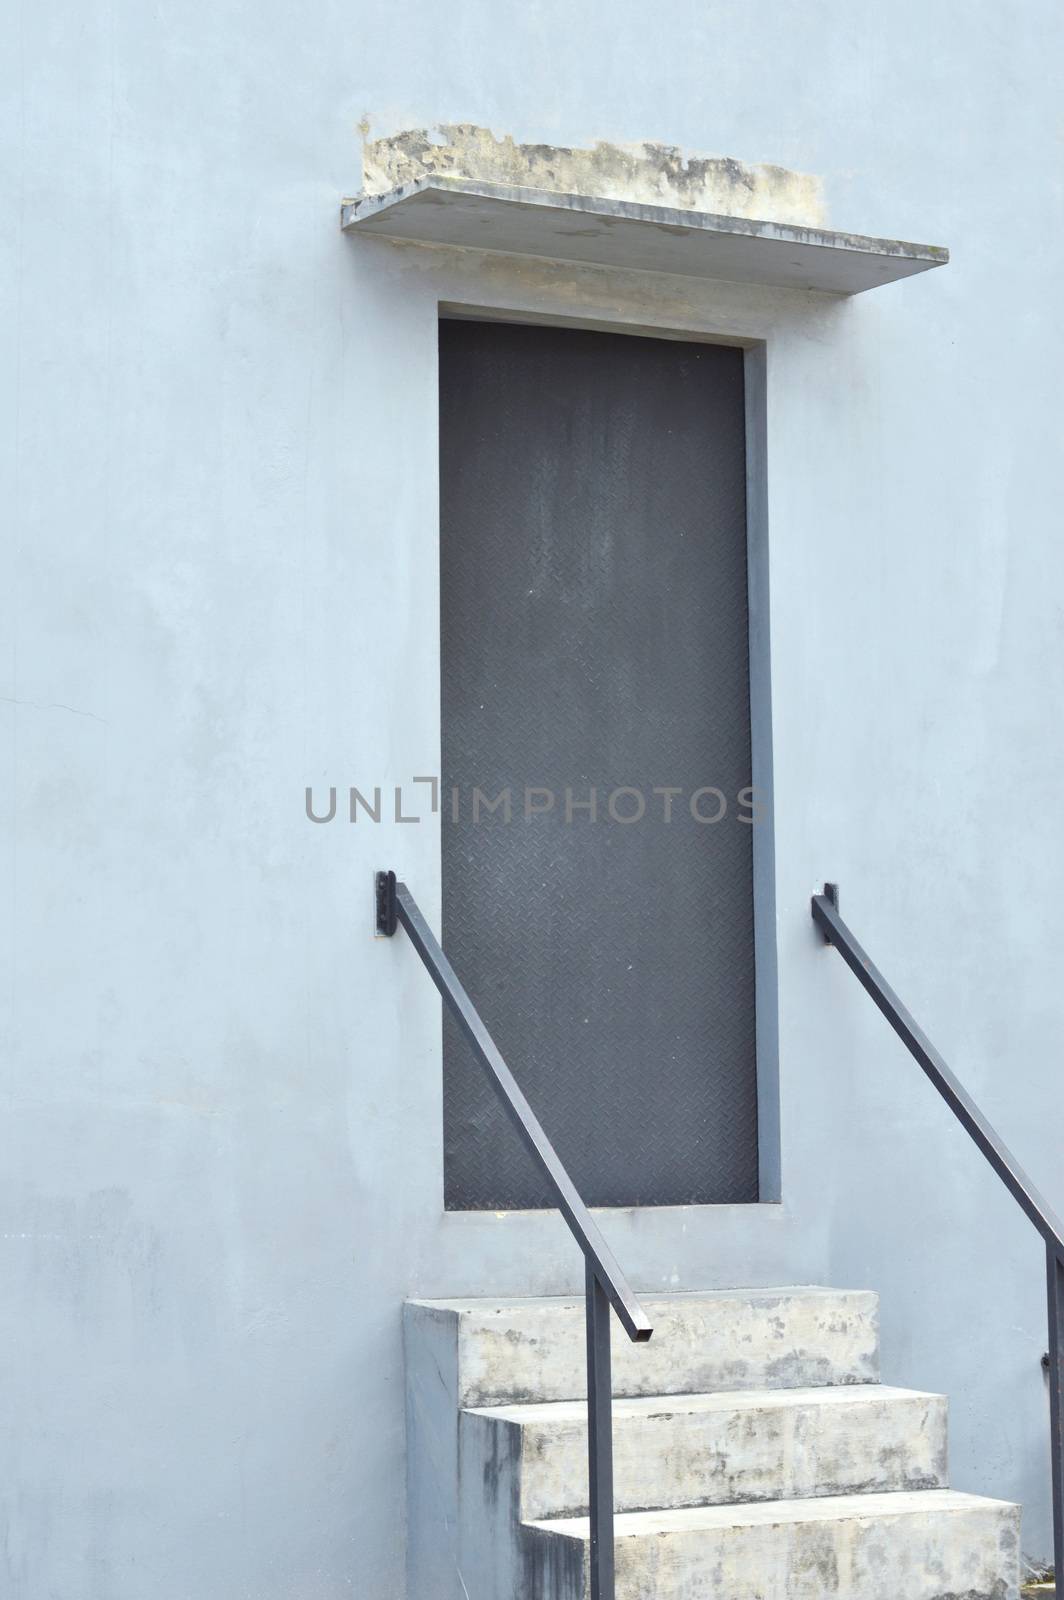 iron door with stairs at the rear of the building